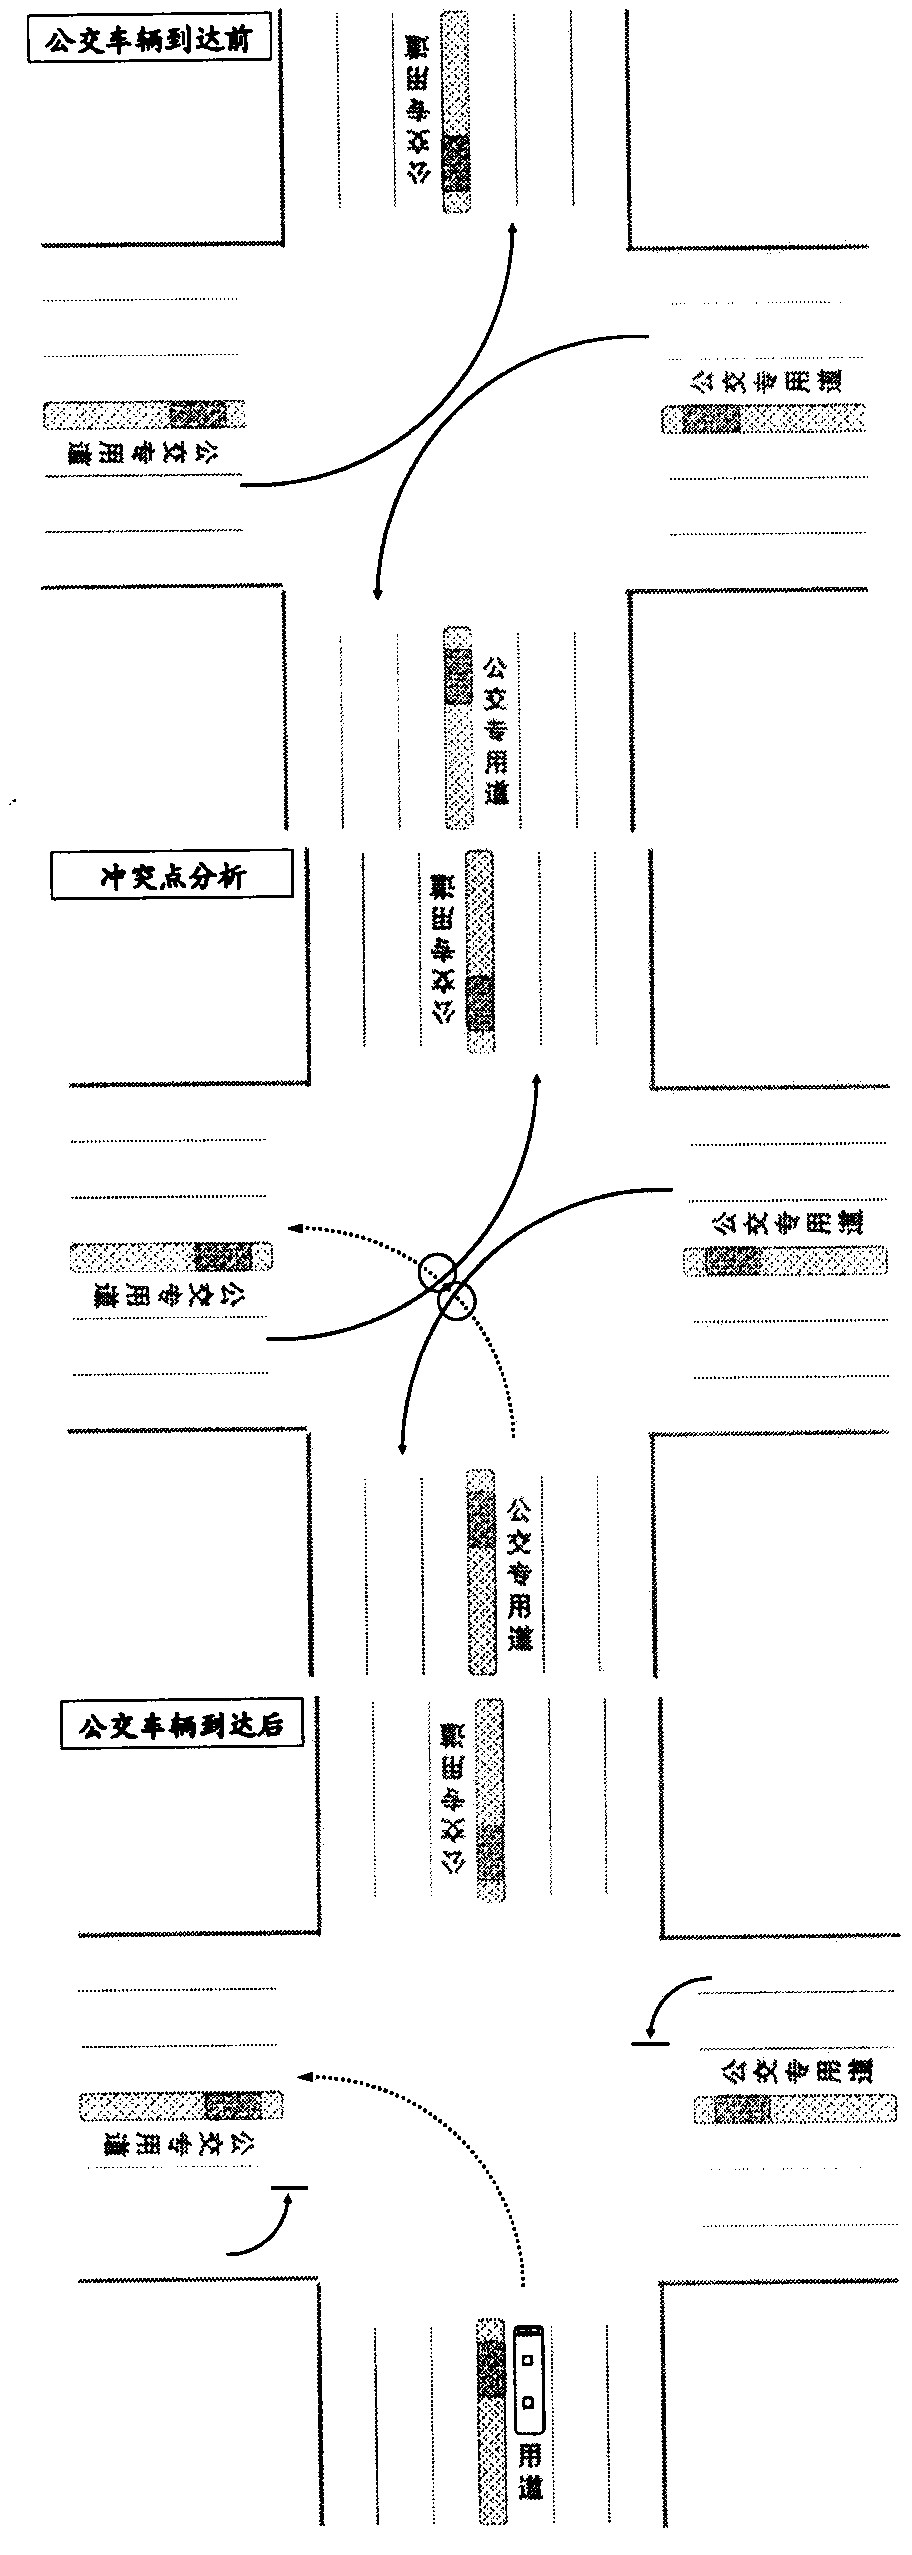 Cooperative control method of left-opened-door bus special phase setting and social traffic flow